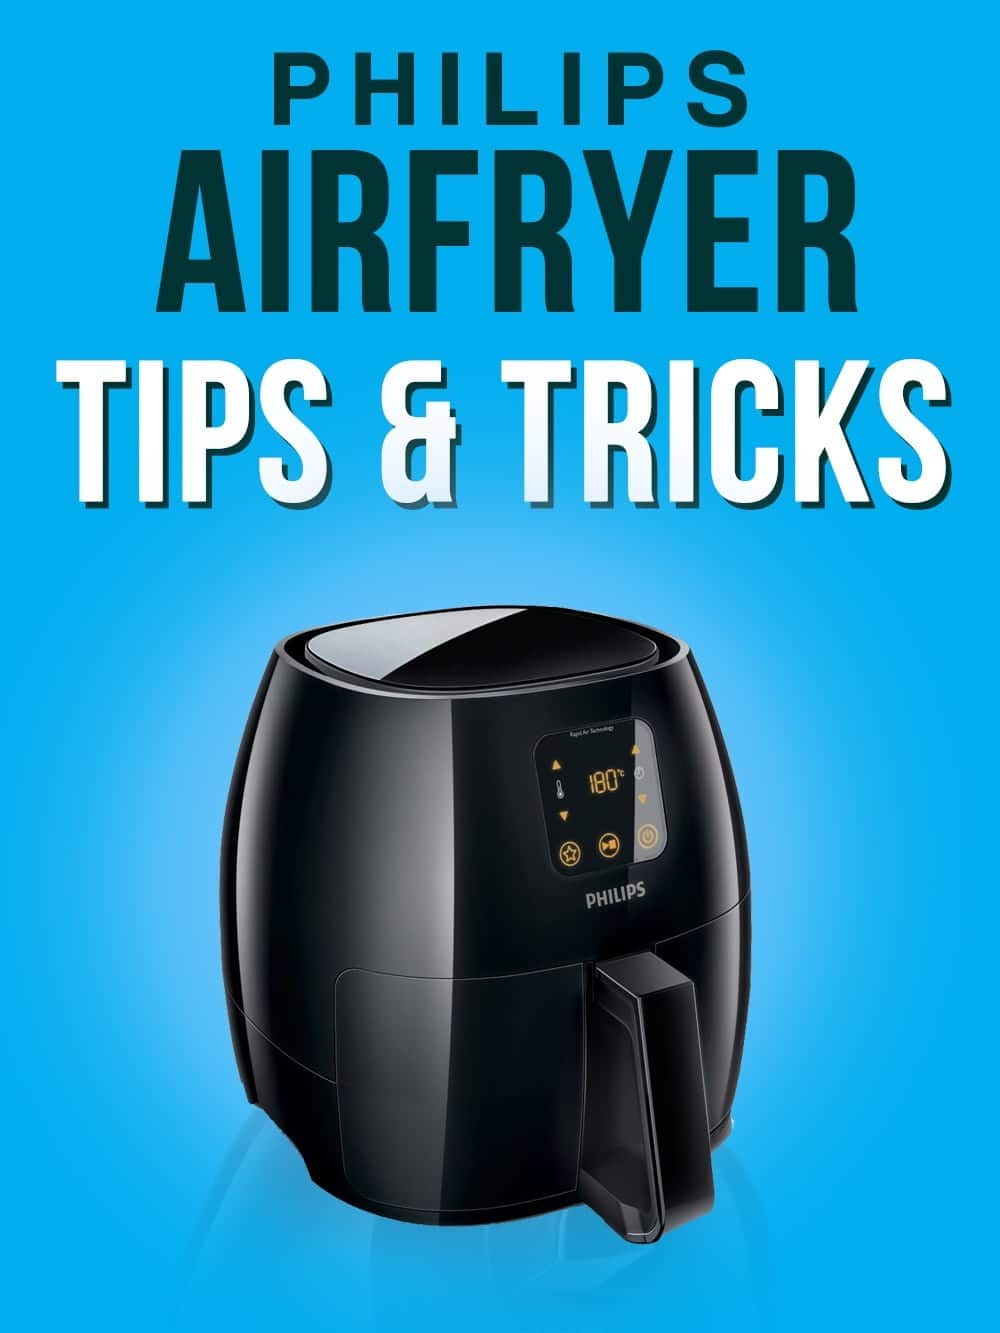 Airfryer Recipes | Here are my top tips and tricks for using your Philips Airfryer from RecipeThis.com